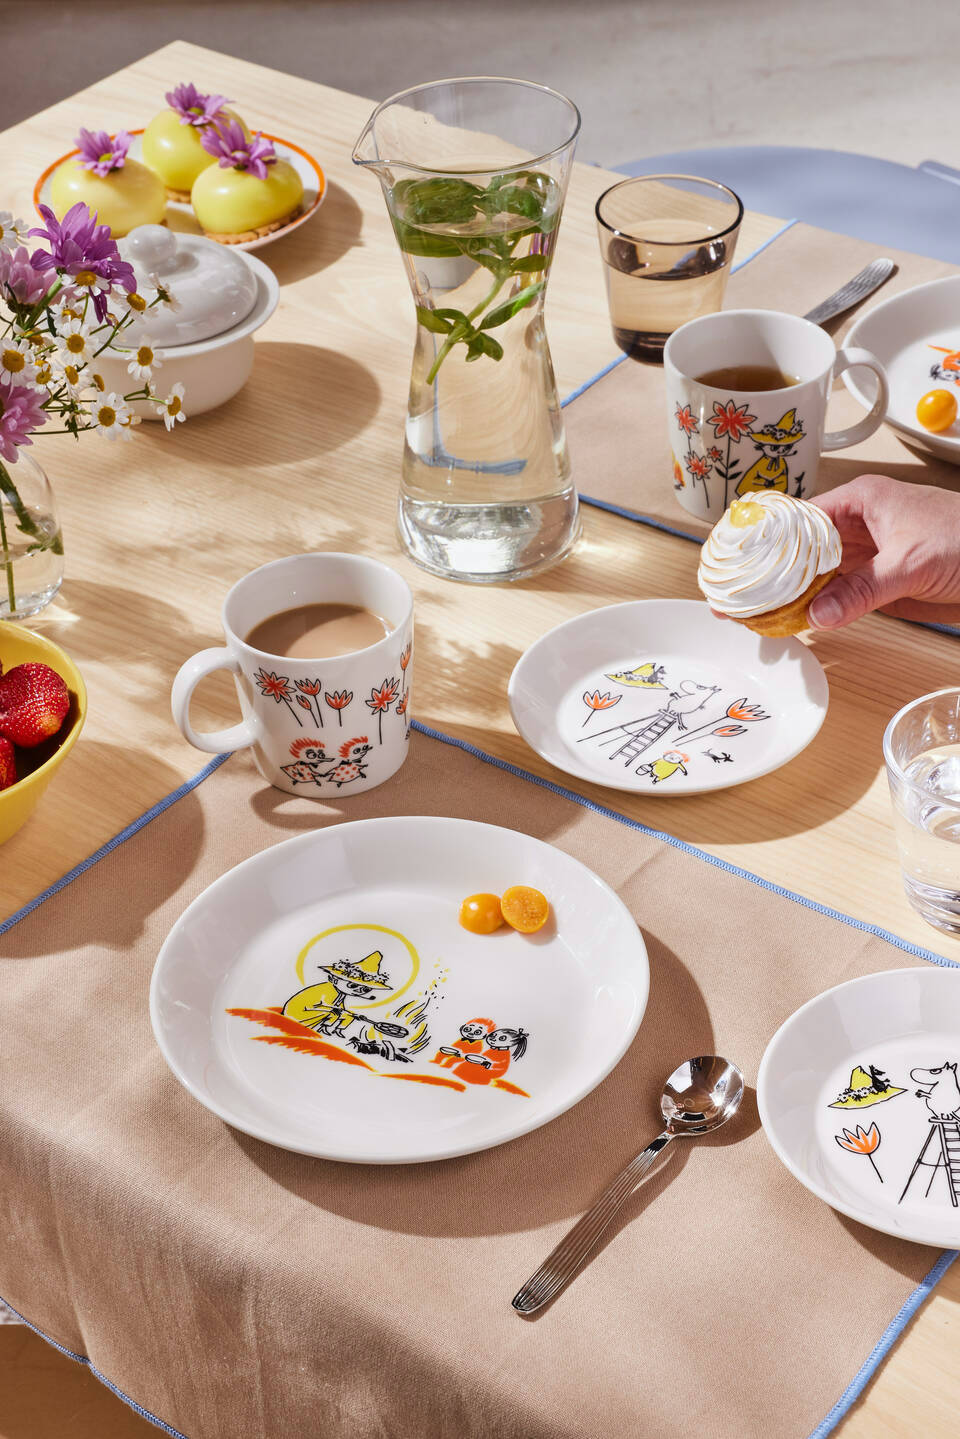 Arabia and Red Cross Moomin dinnerware collection displayed on a laid table with flowers and cupcakes